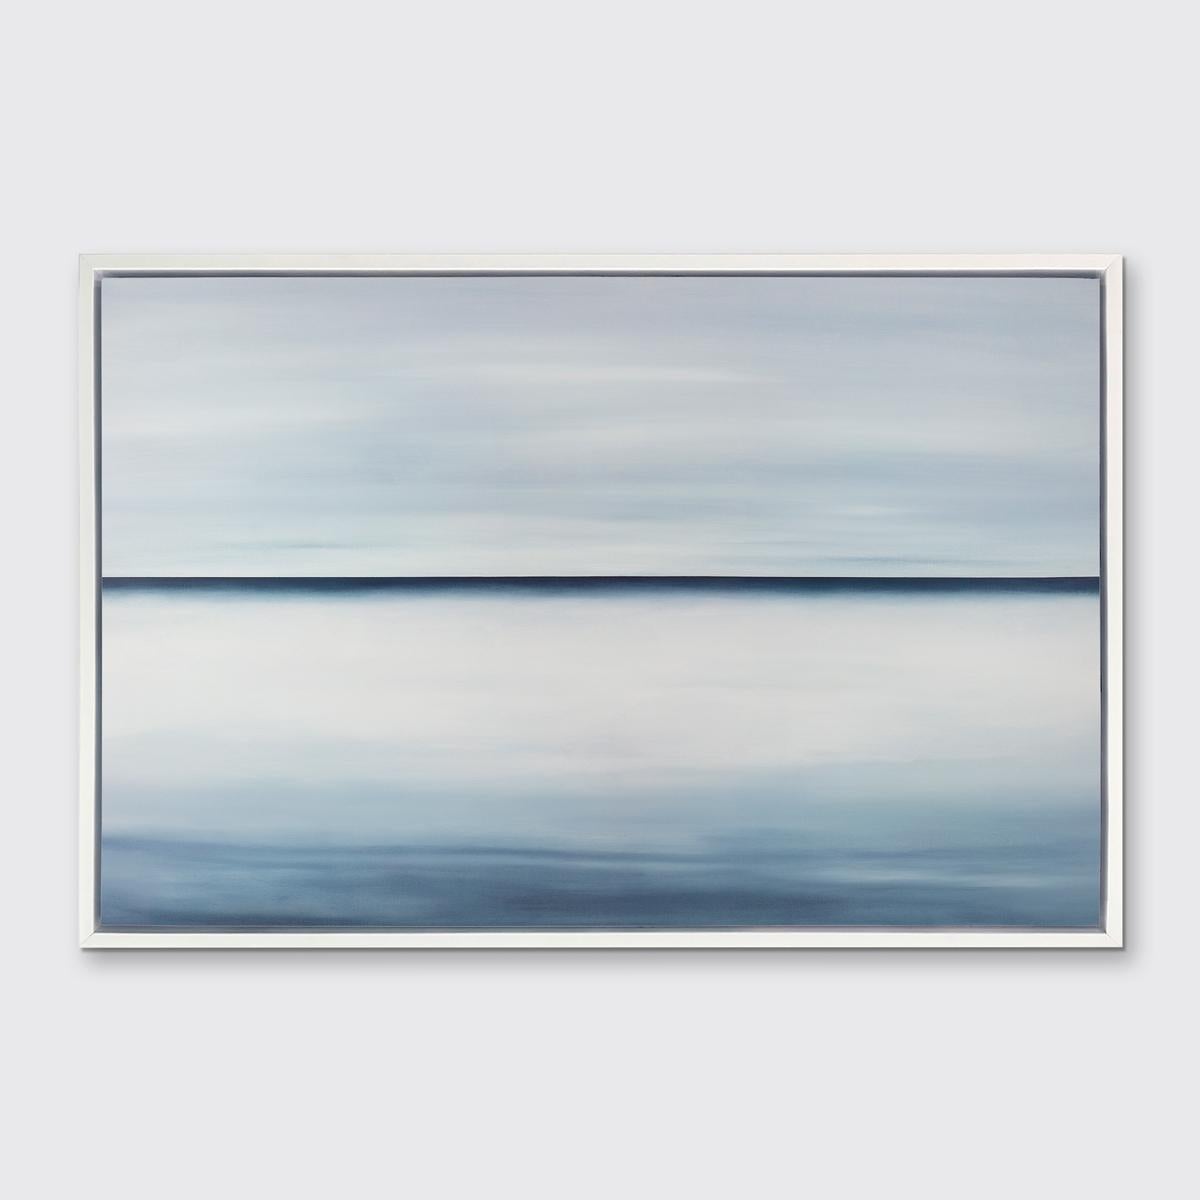 Tony Iadicicco Abstract Print - "Open Water, " Framed Limited Edition Giclee Print, 24" x 36"